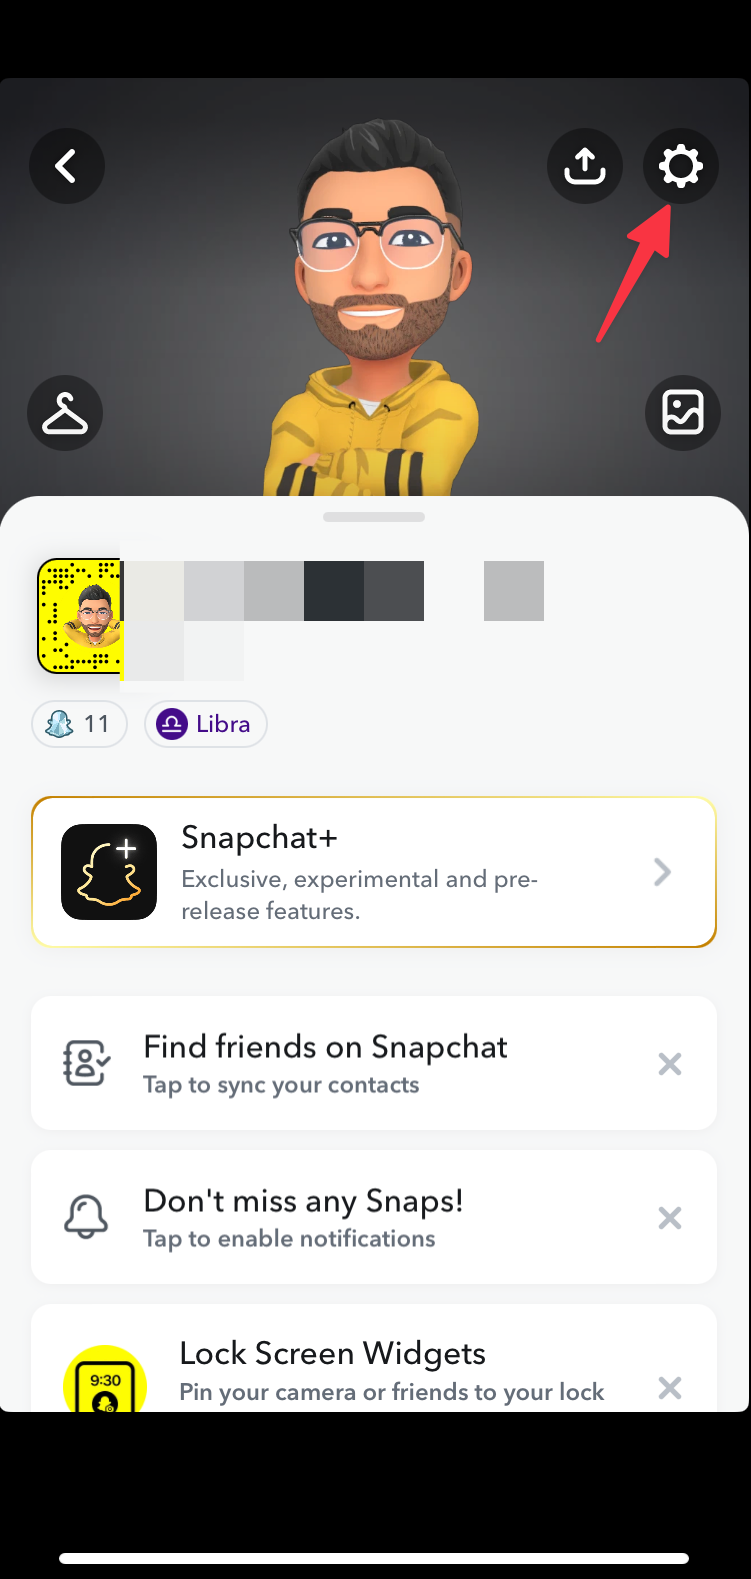 Remote.tools pointing to settings gear icon to change phone number from Snapchat app